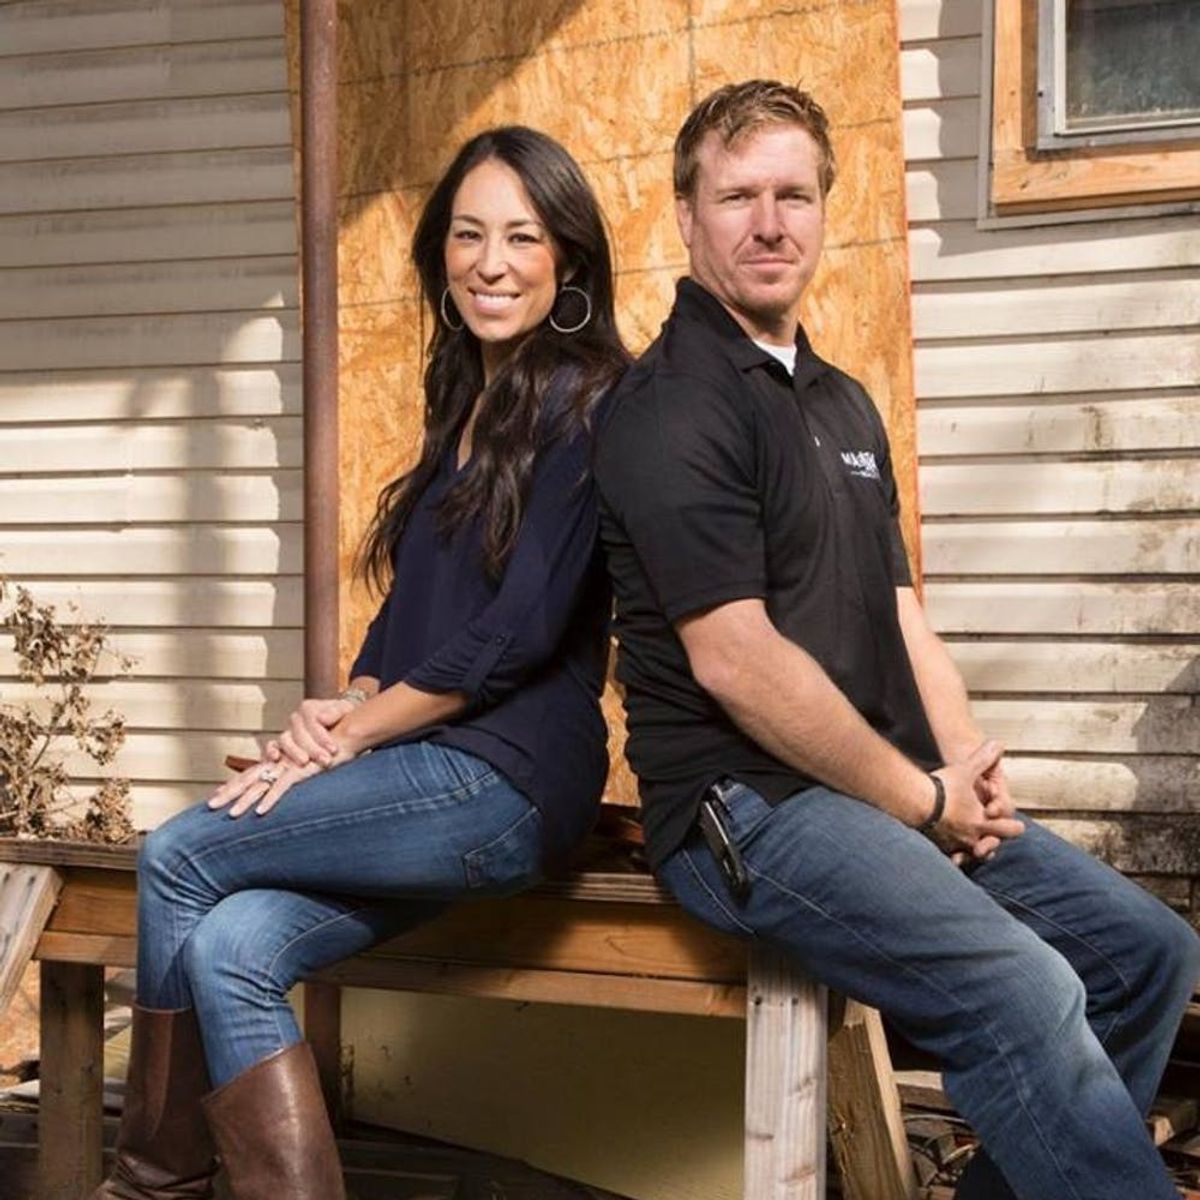 Design Drama! Fixer Upper Hosts Are Peeved About Clients Airbnb-ing Their Homes